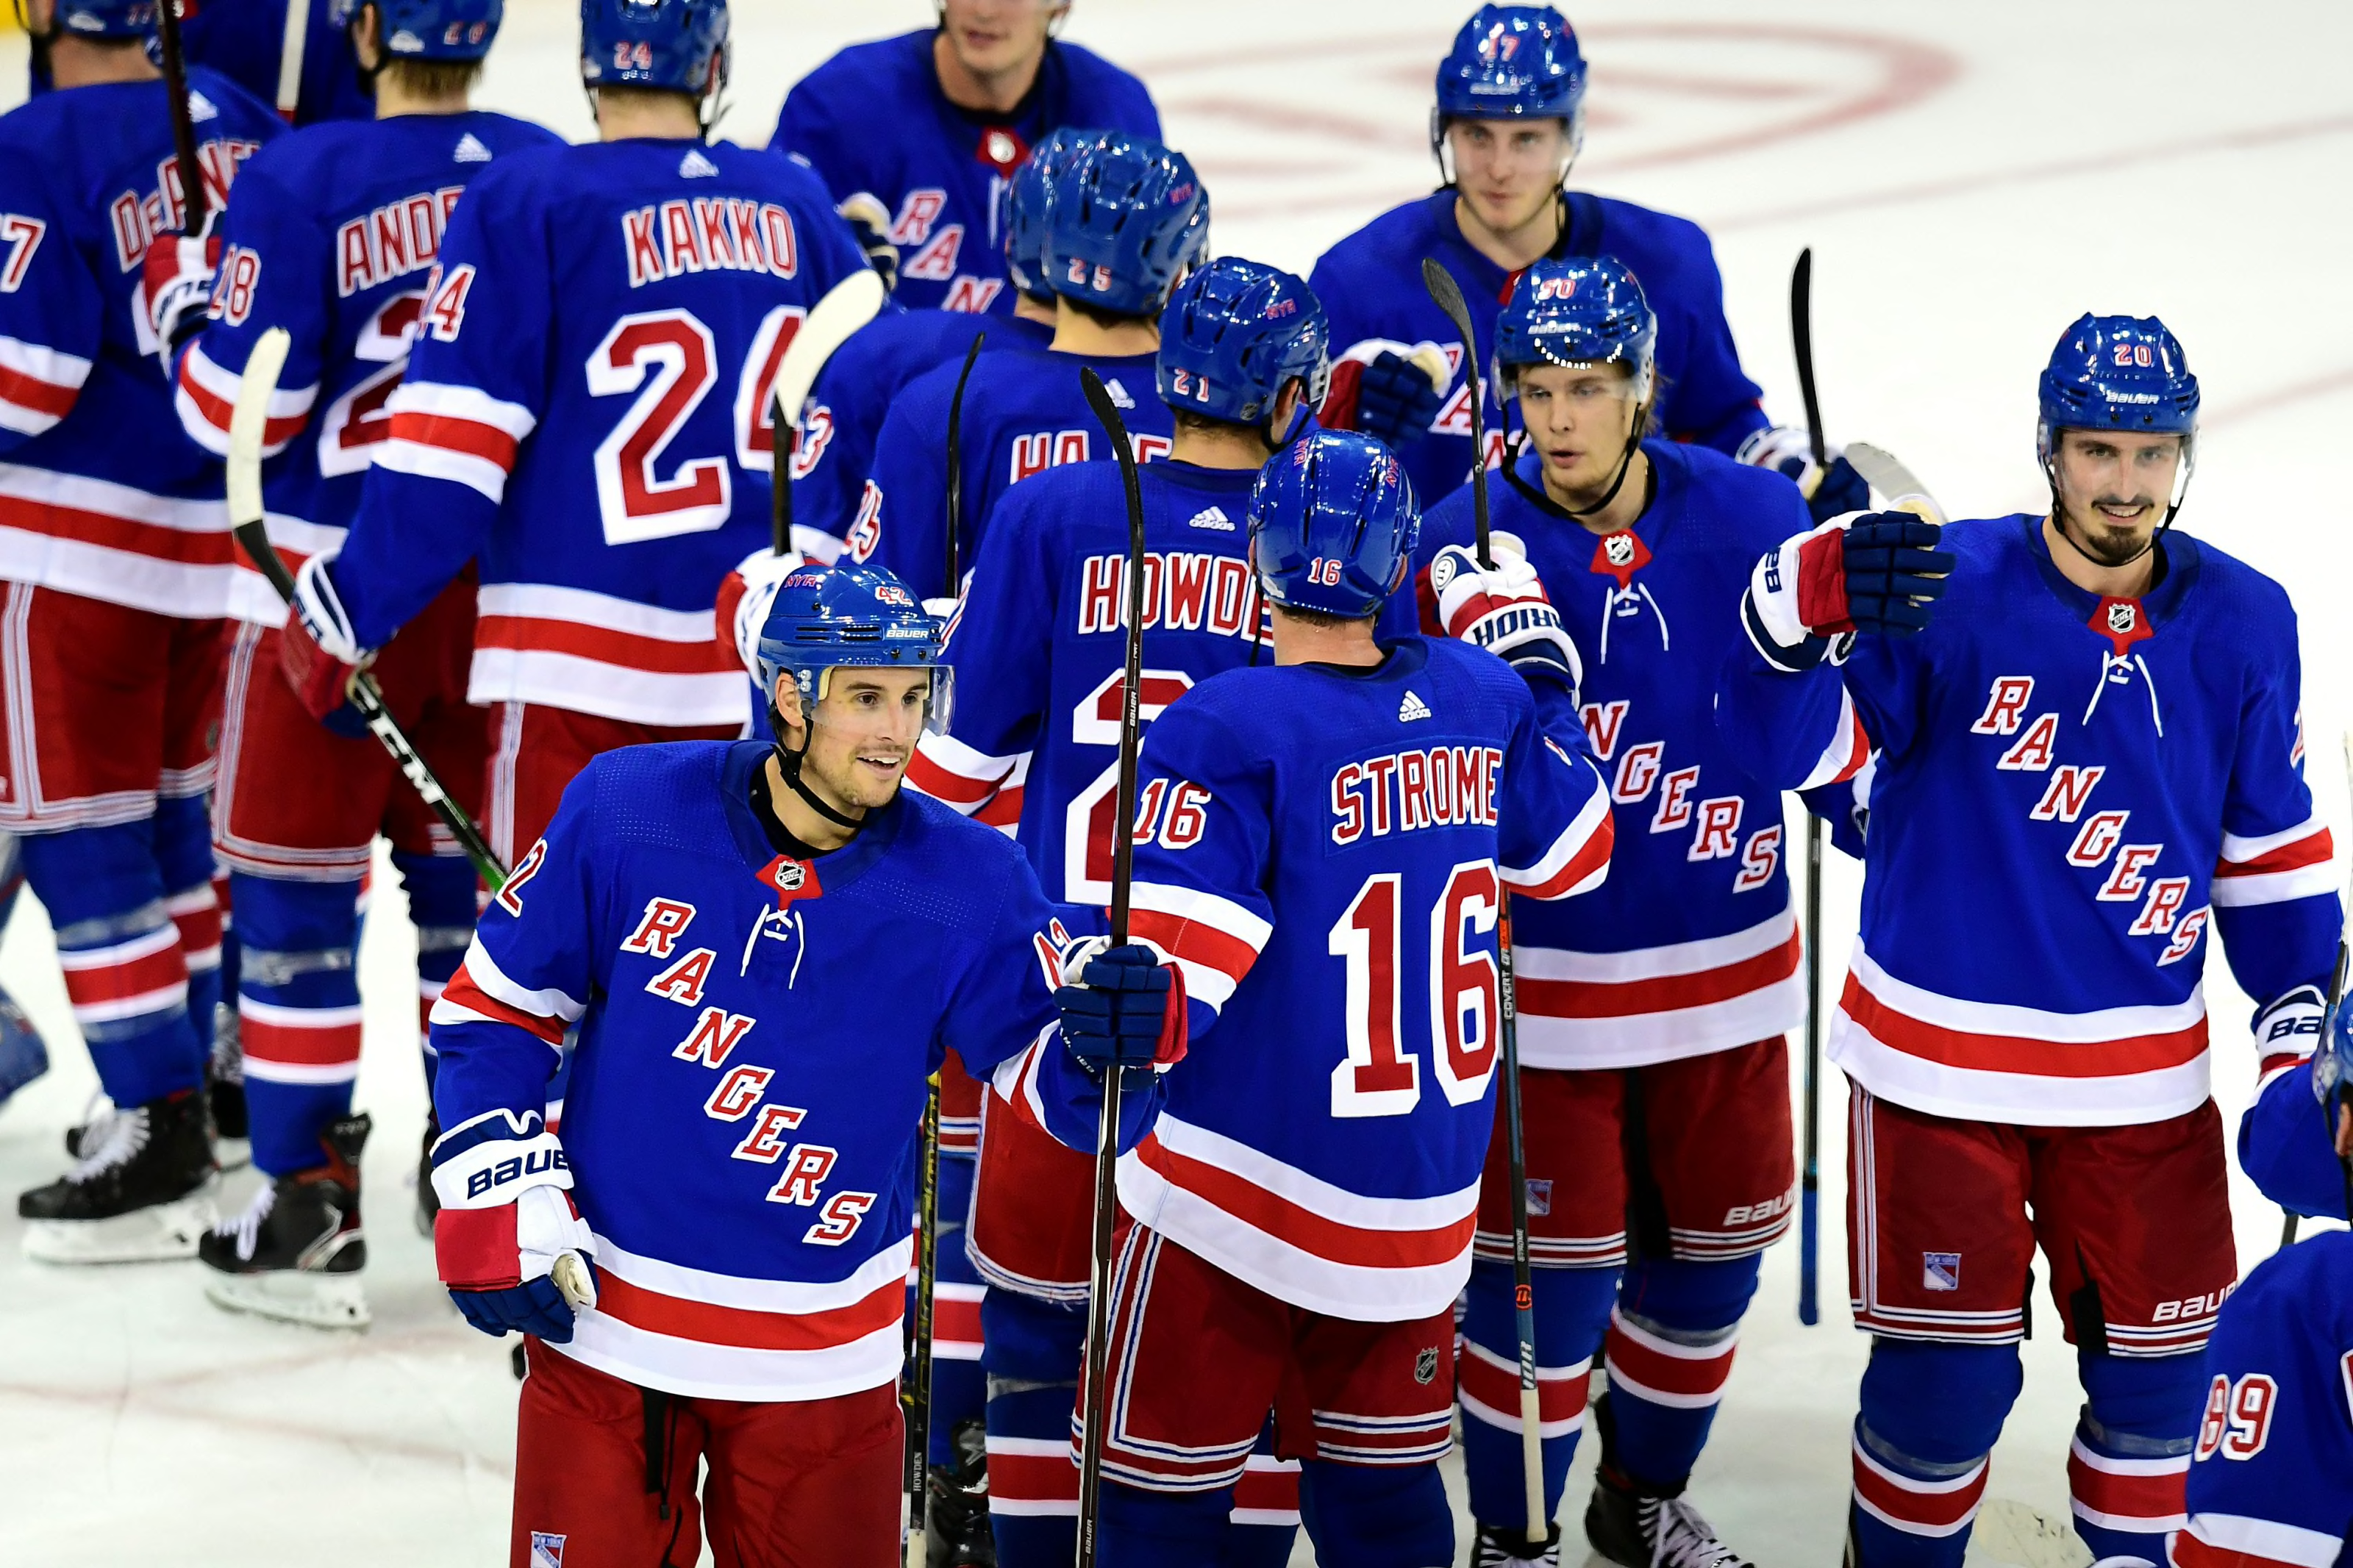 Who do the New York Rangers want to play in the playoffs?